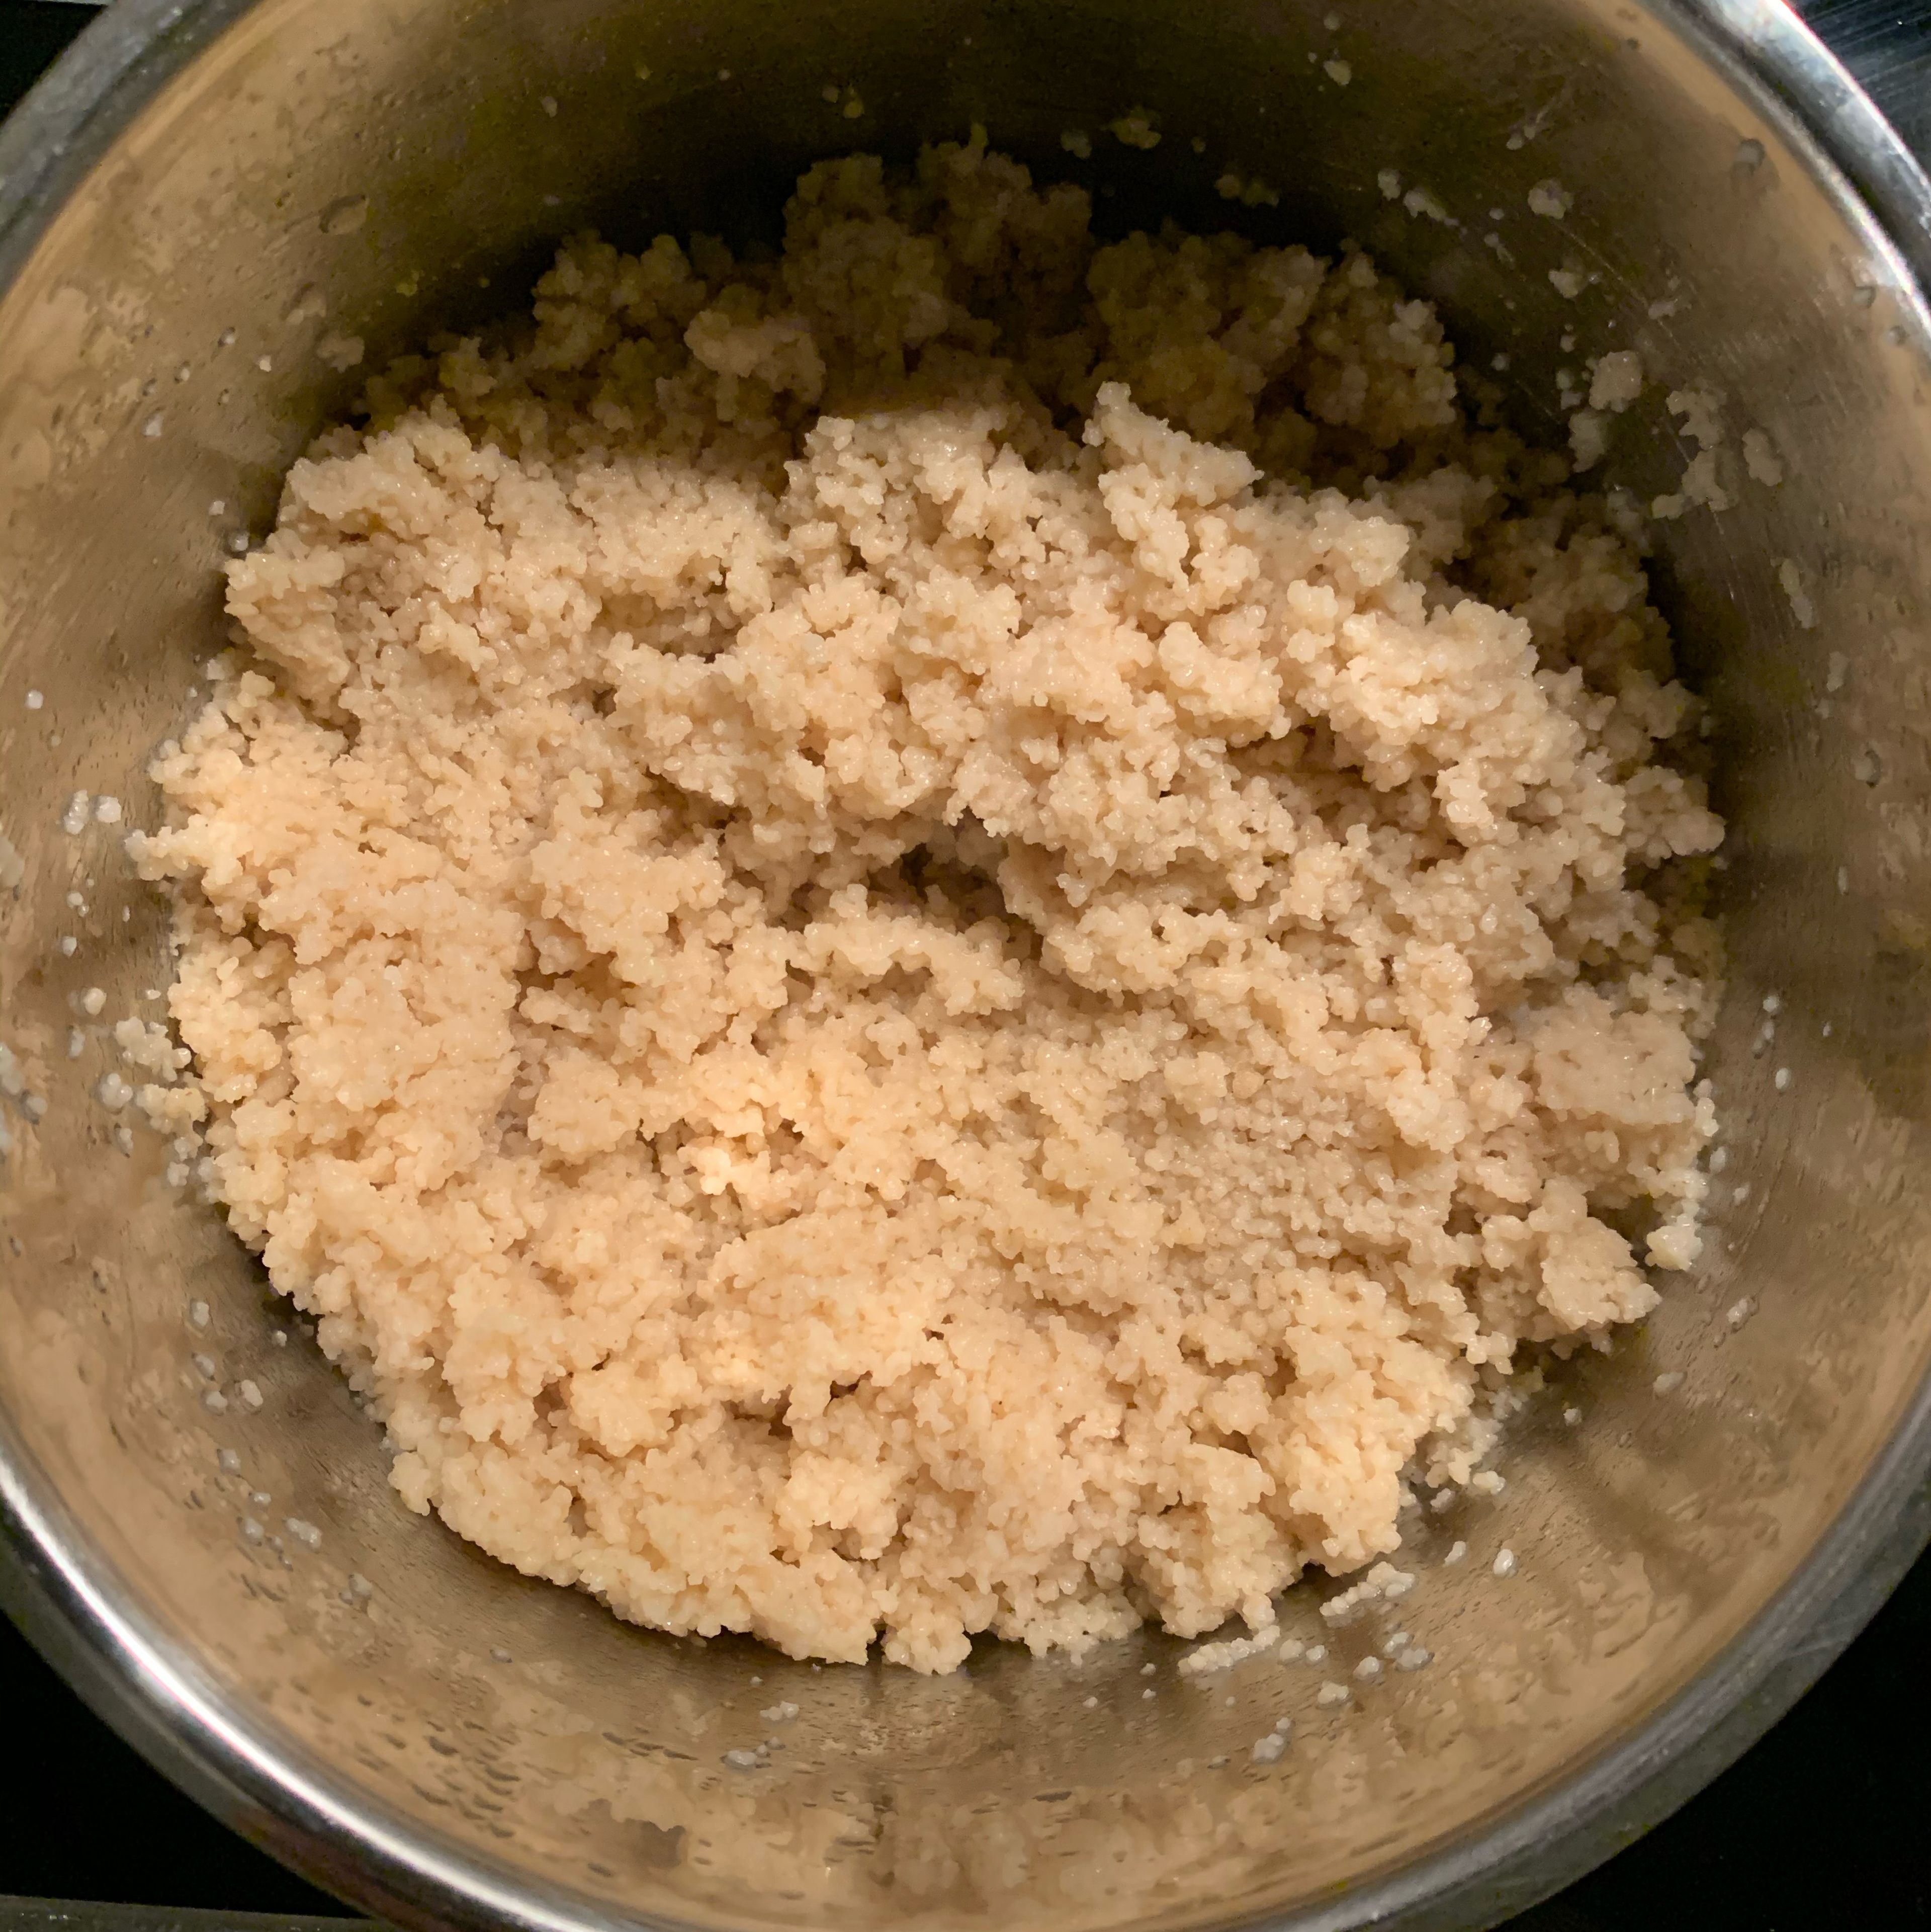 Cook couscous according to the package instructions and leave to cool down.